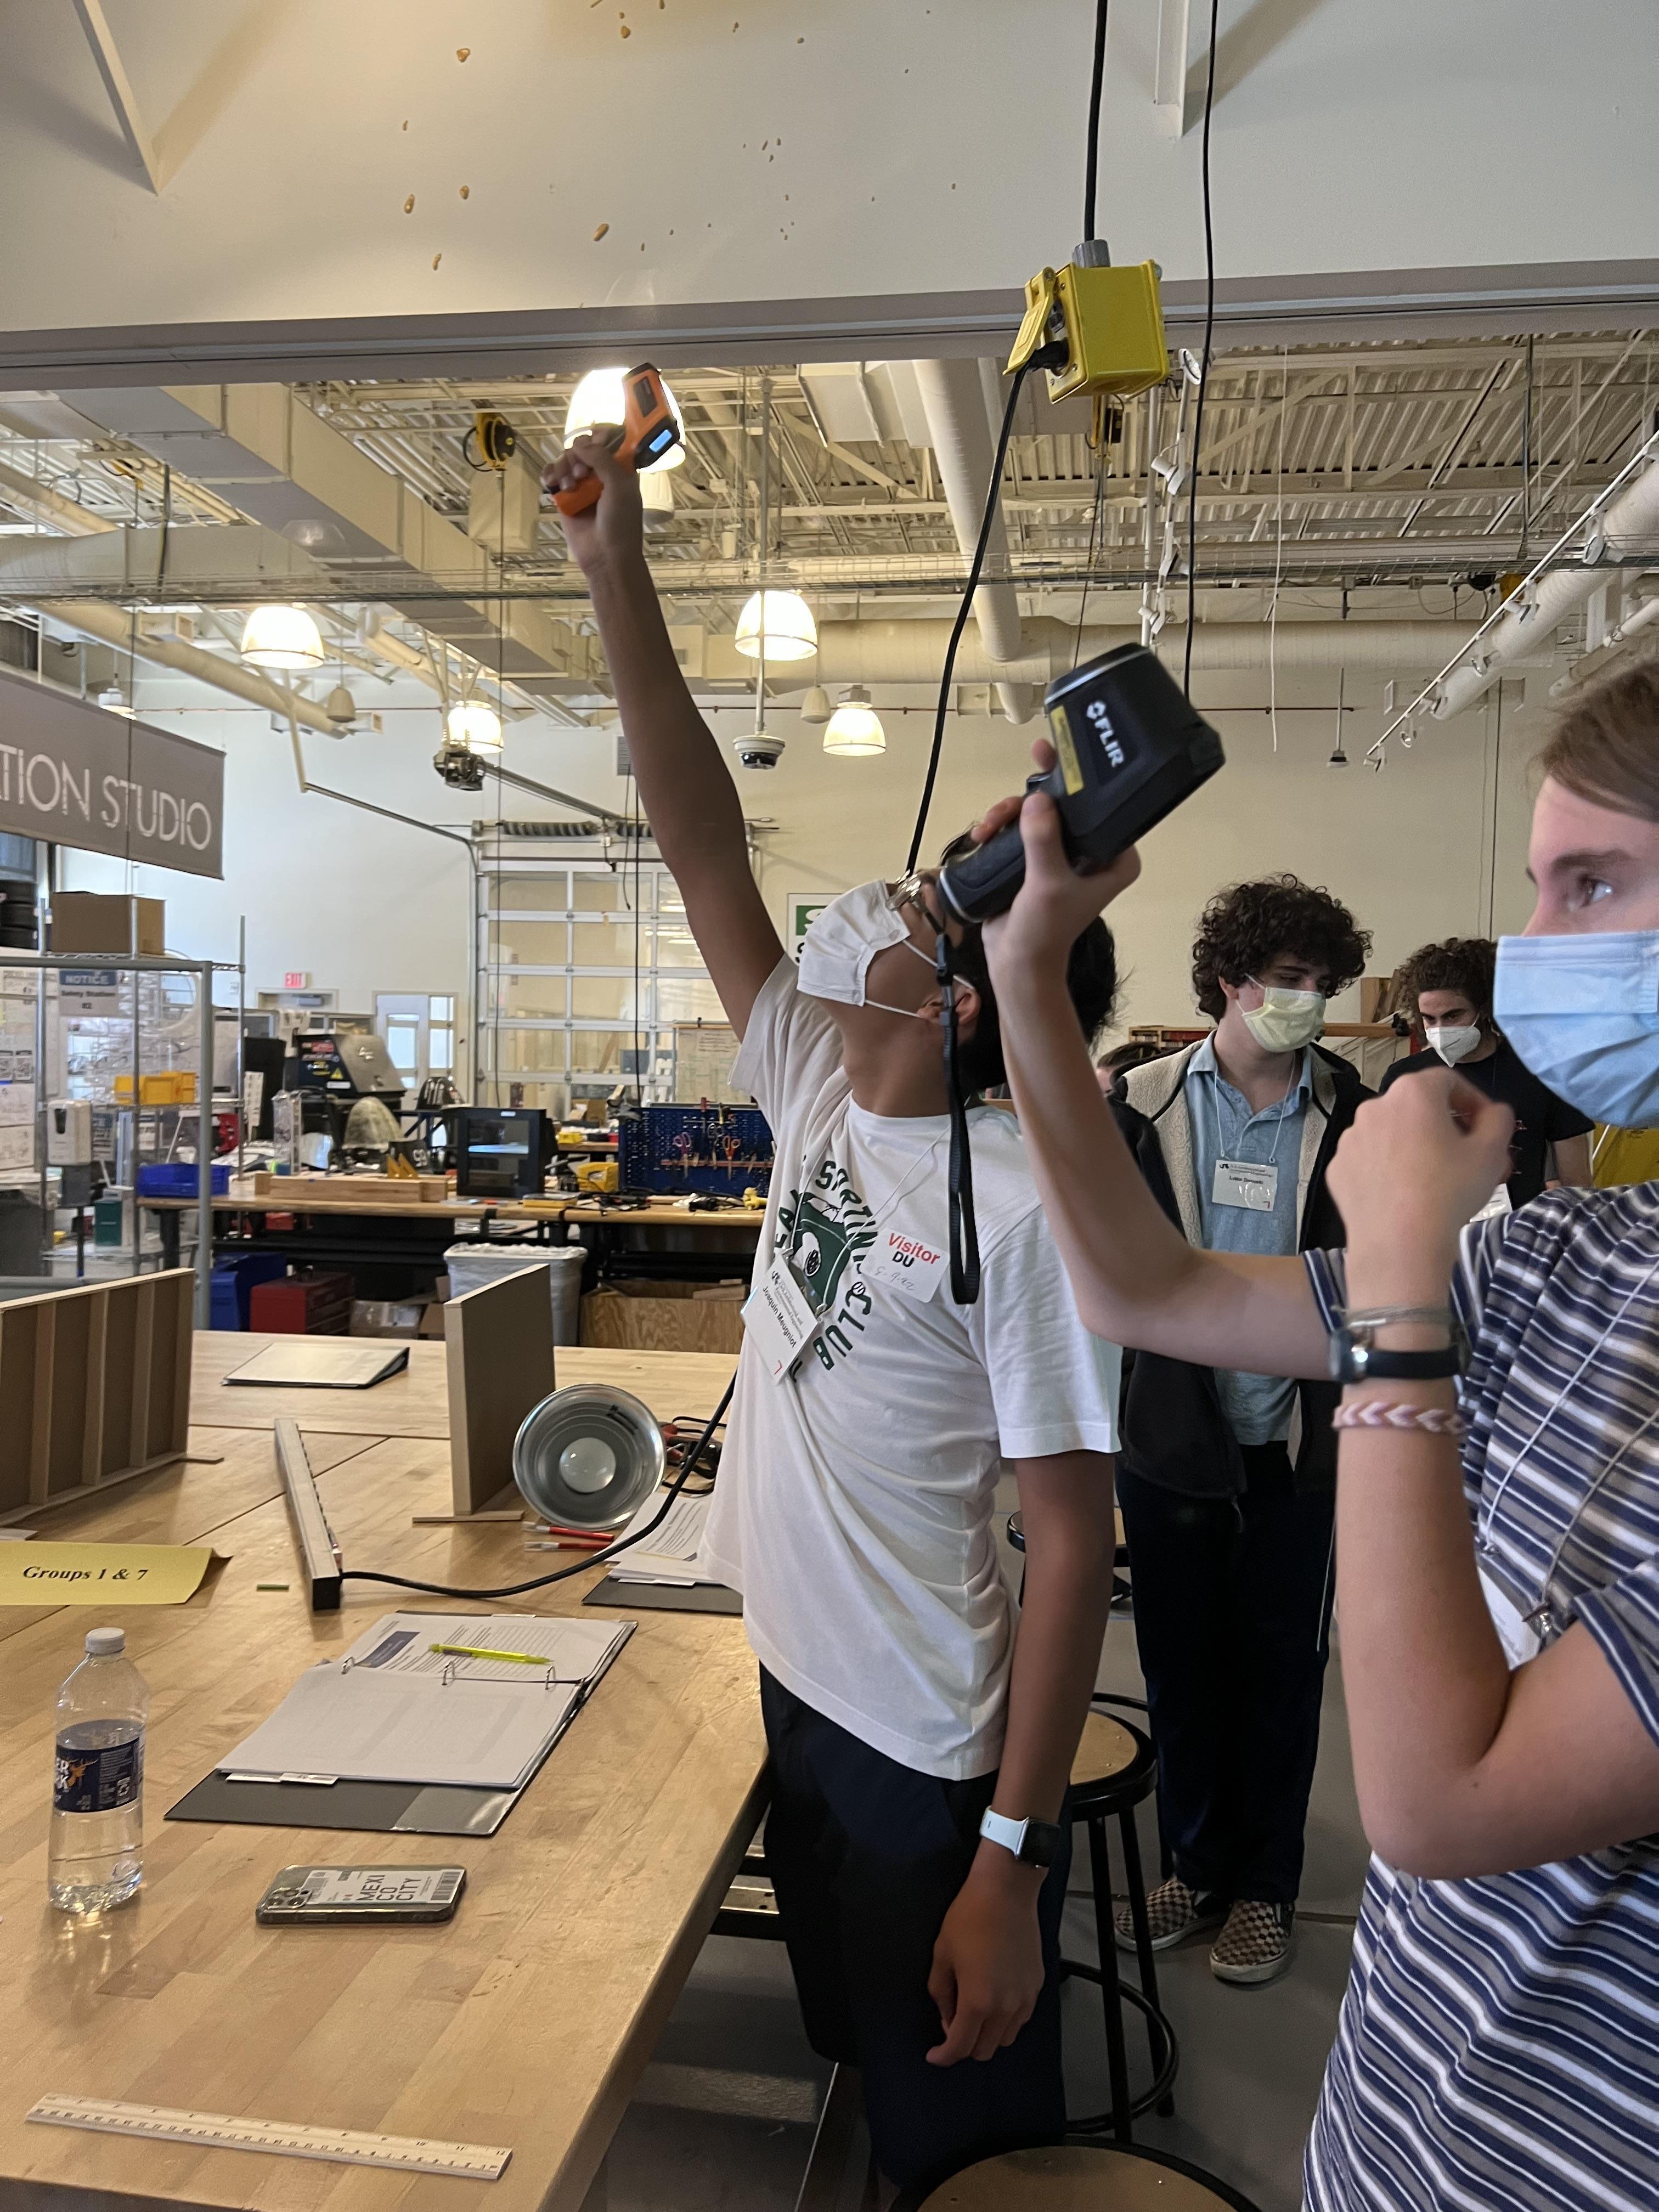 Campers testing the air quality with sensors